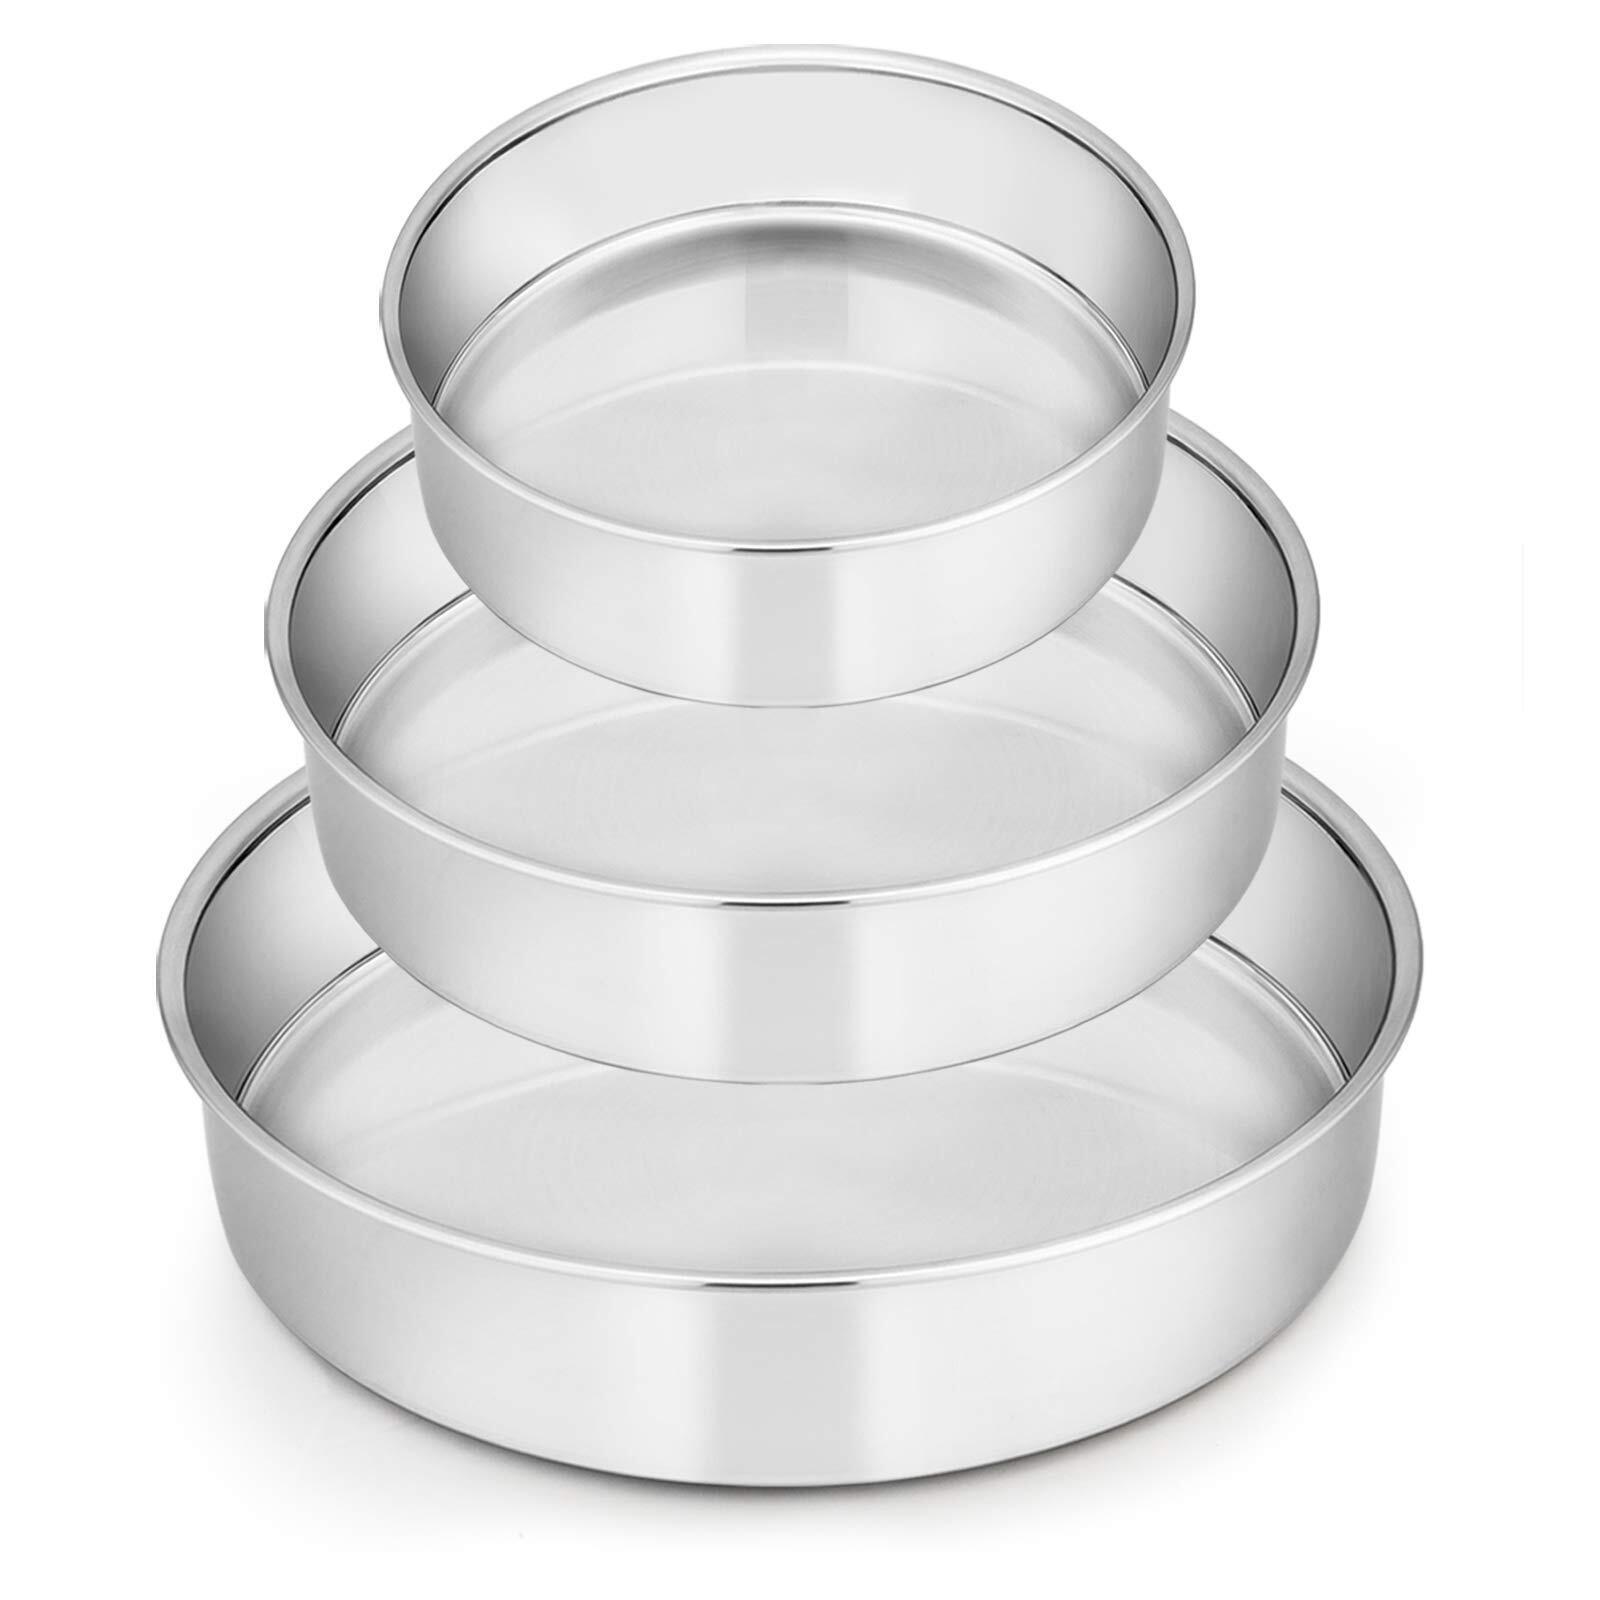 Cake Pan Set of 3 (6 inch/8 inch/9½ inch), Stainless Steel Round Layer Cake B...